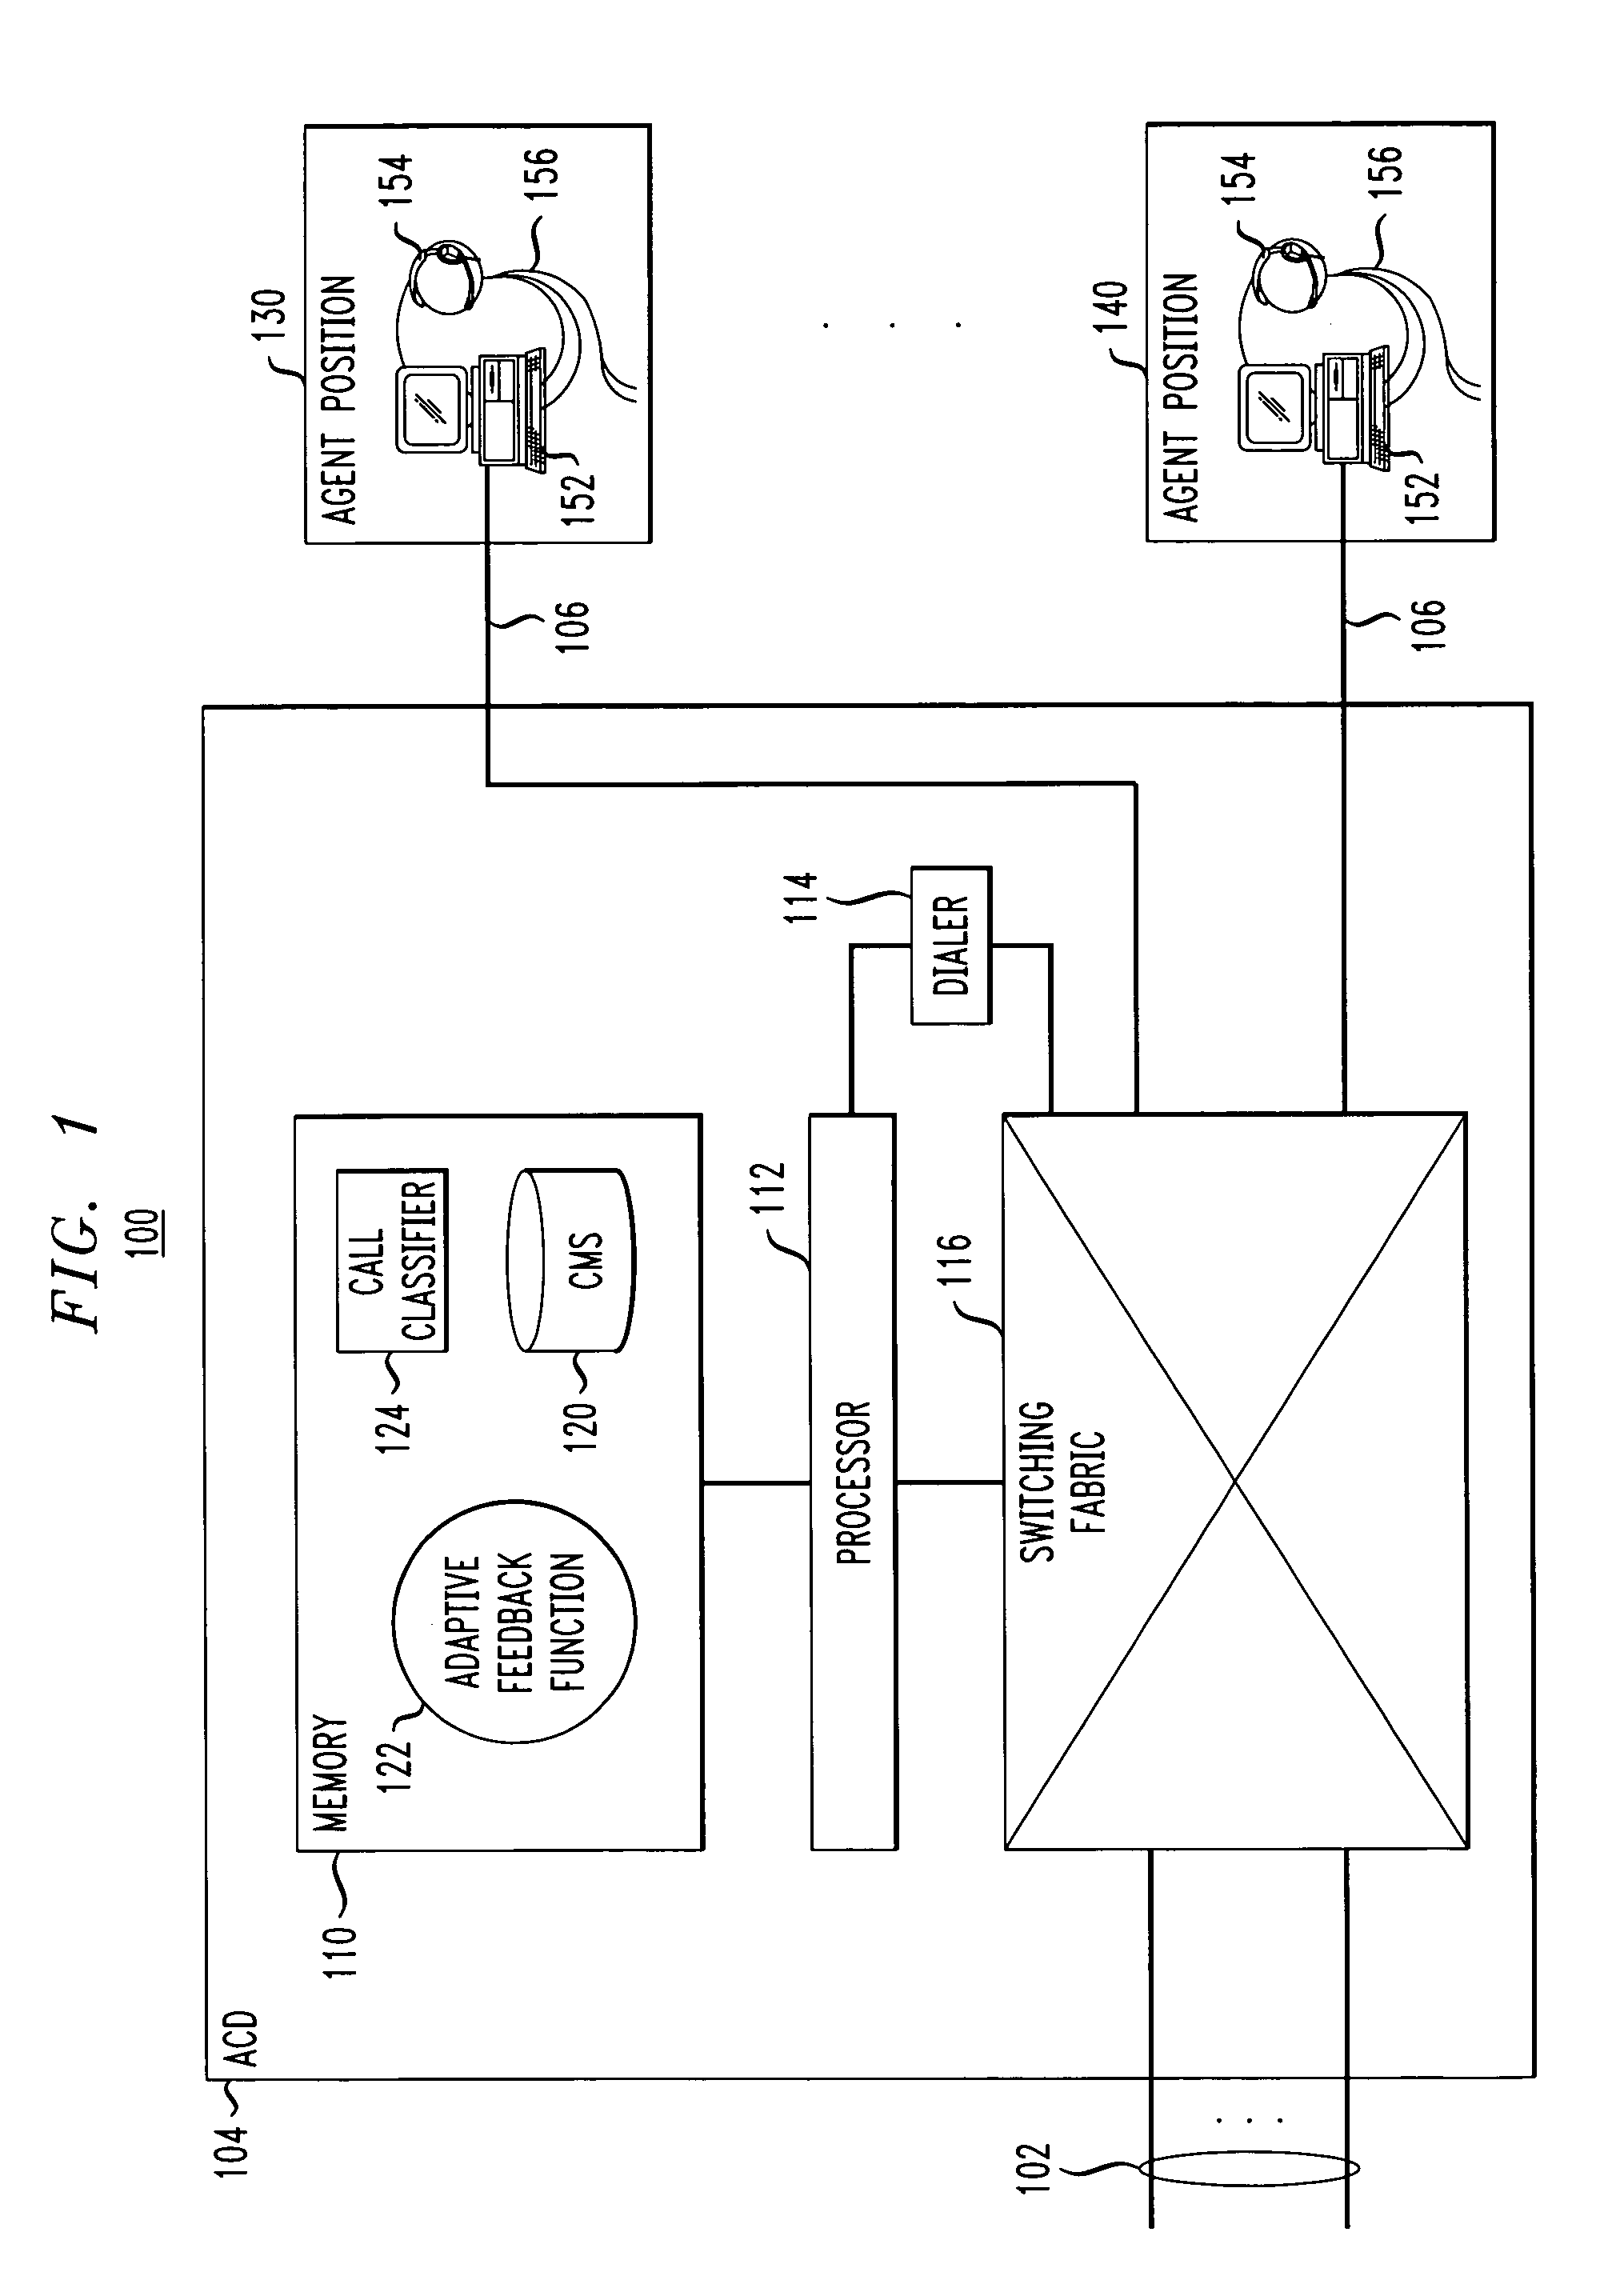 Adaptive feedback arrangement for controlling agent availability service level in a predictive dialer